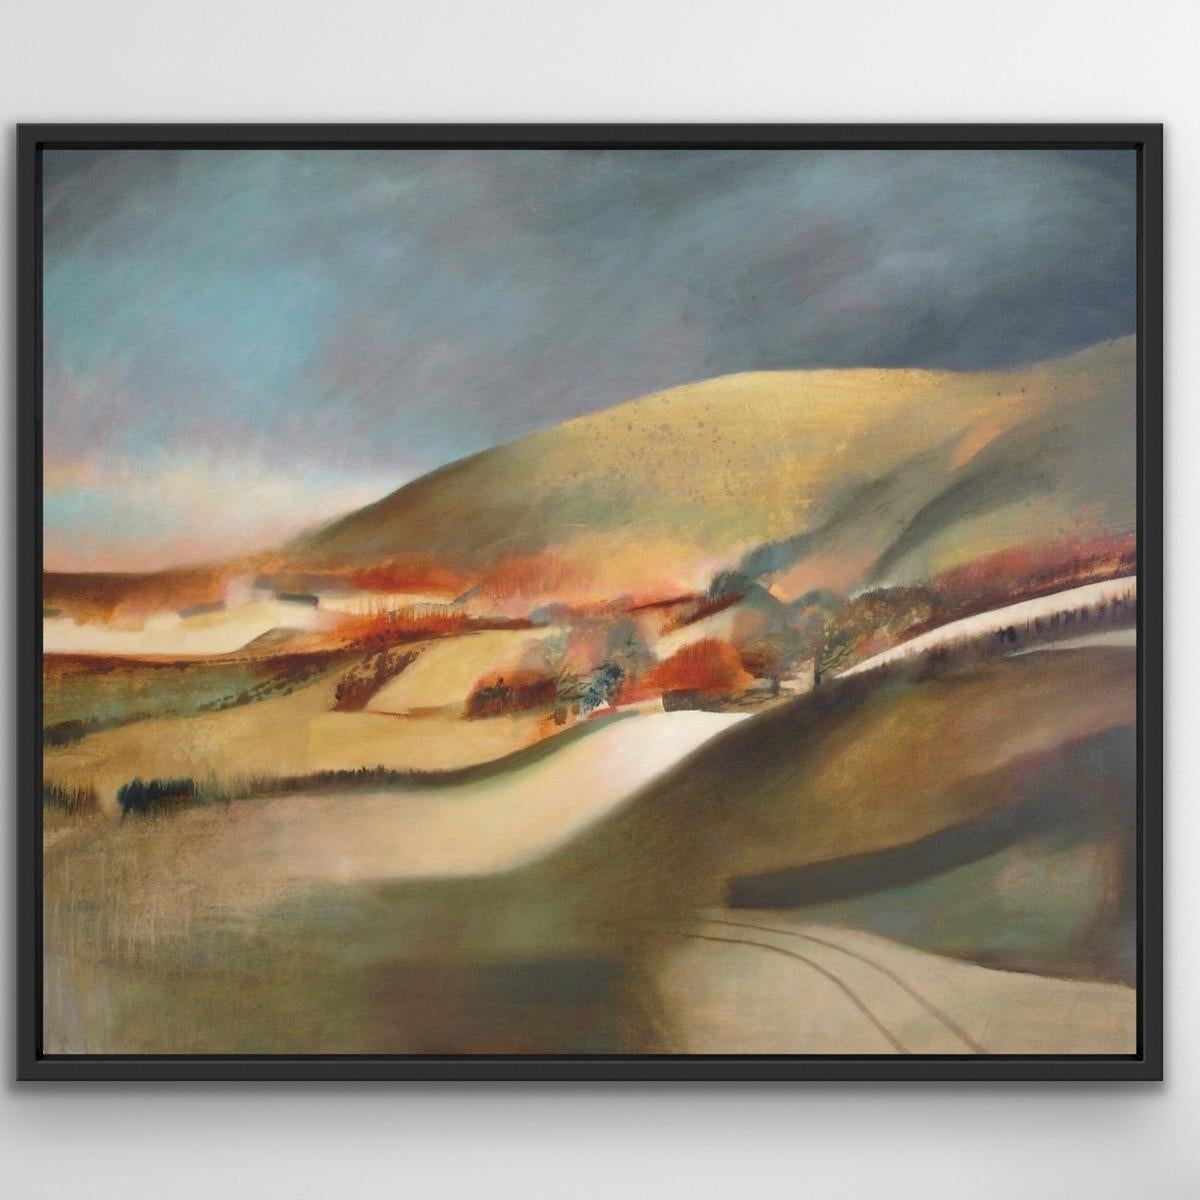 Edge - an original oil painting by Charlie Baird depicting a West Country landscape beneath a vast blue sky with ascending darkness. Multi-layered, detailed oil painting.
Charlie Baird has paintings available online and in our gallery with Wychwood